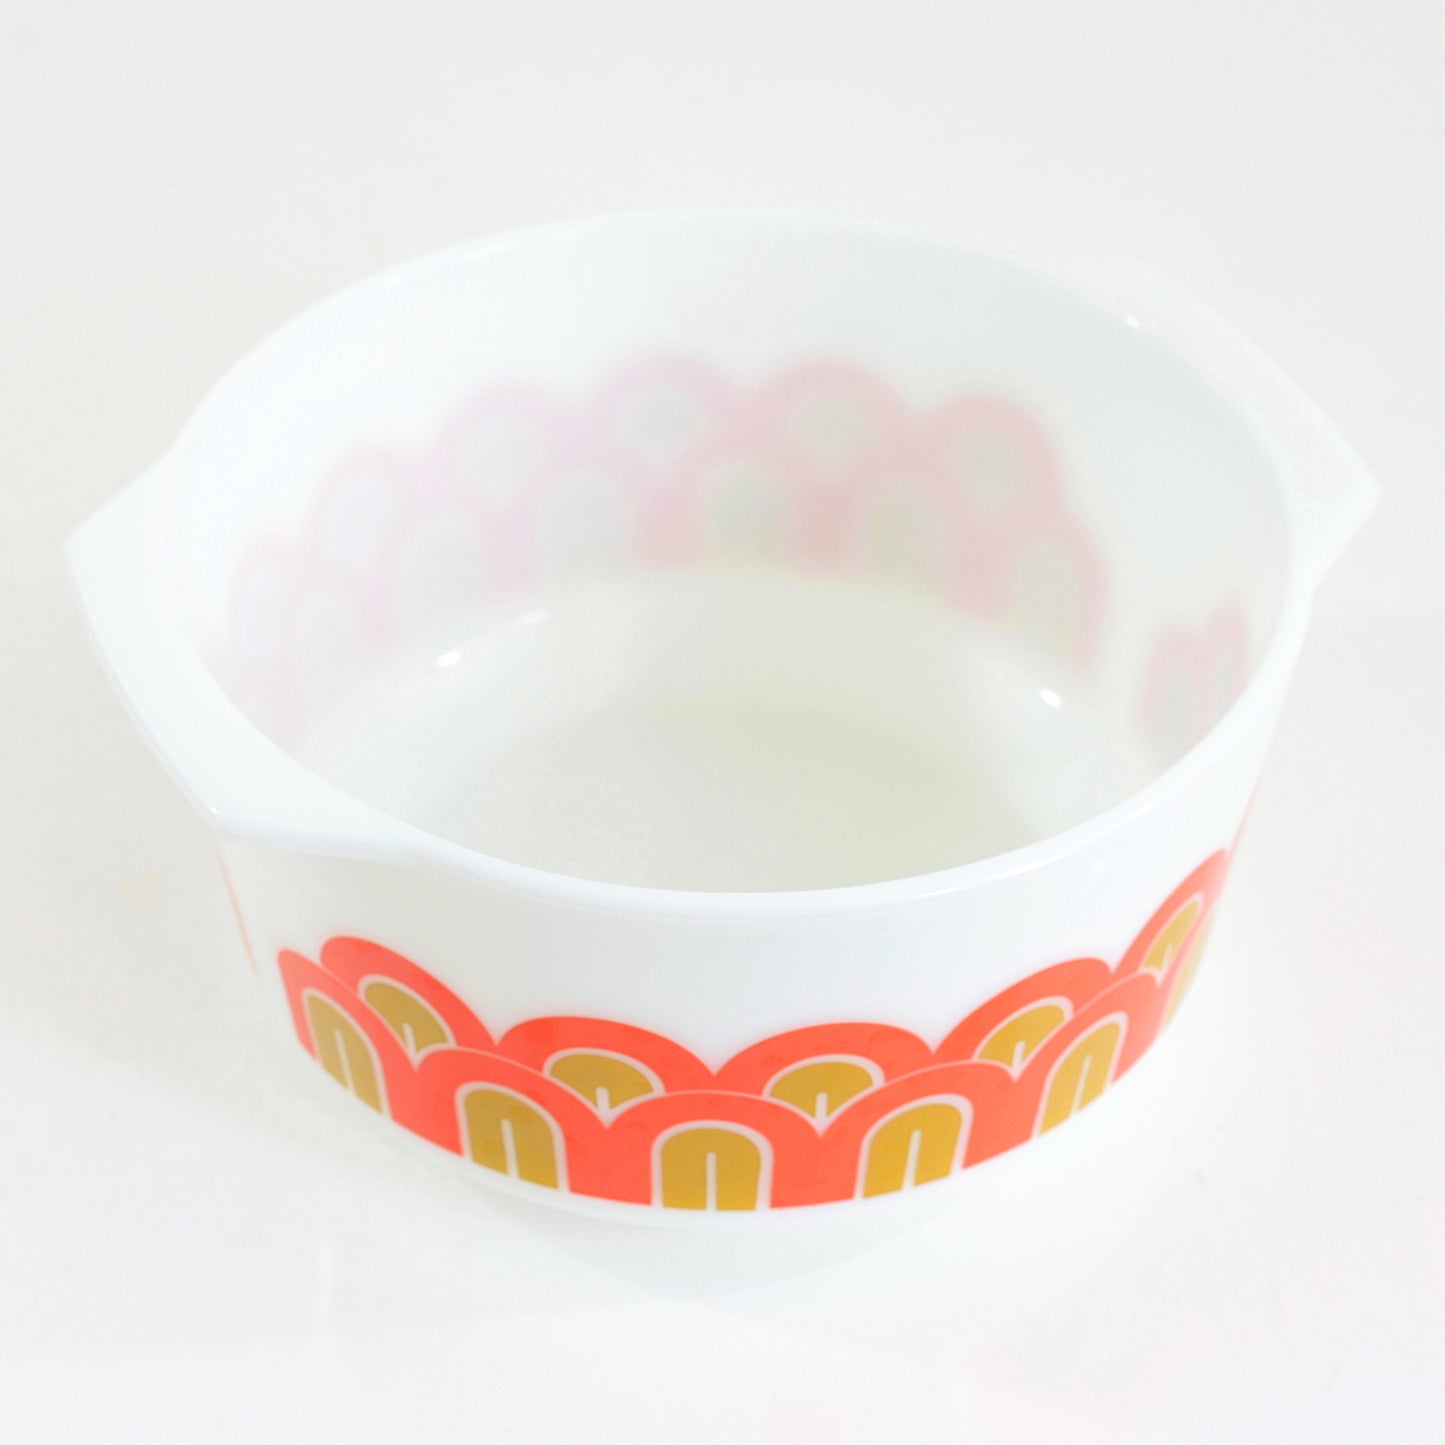 SOLD - Vintage Mod Arches Promotional Pyrex Mixing Bowl